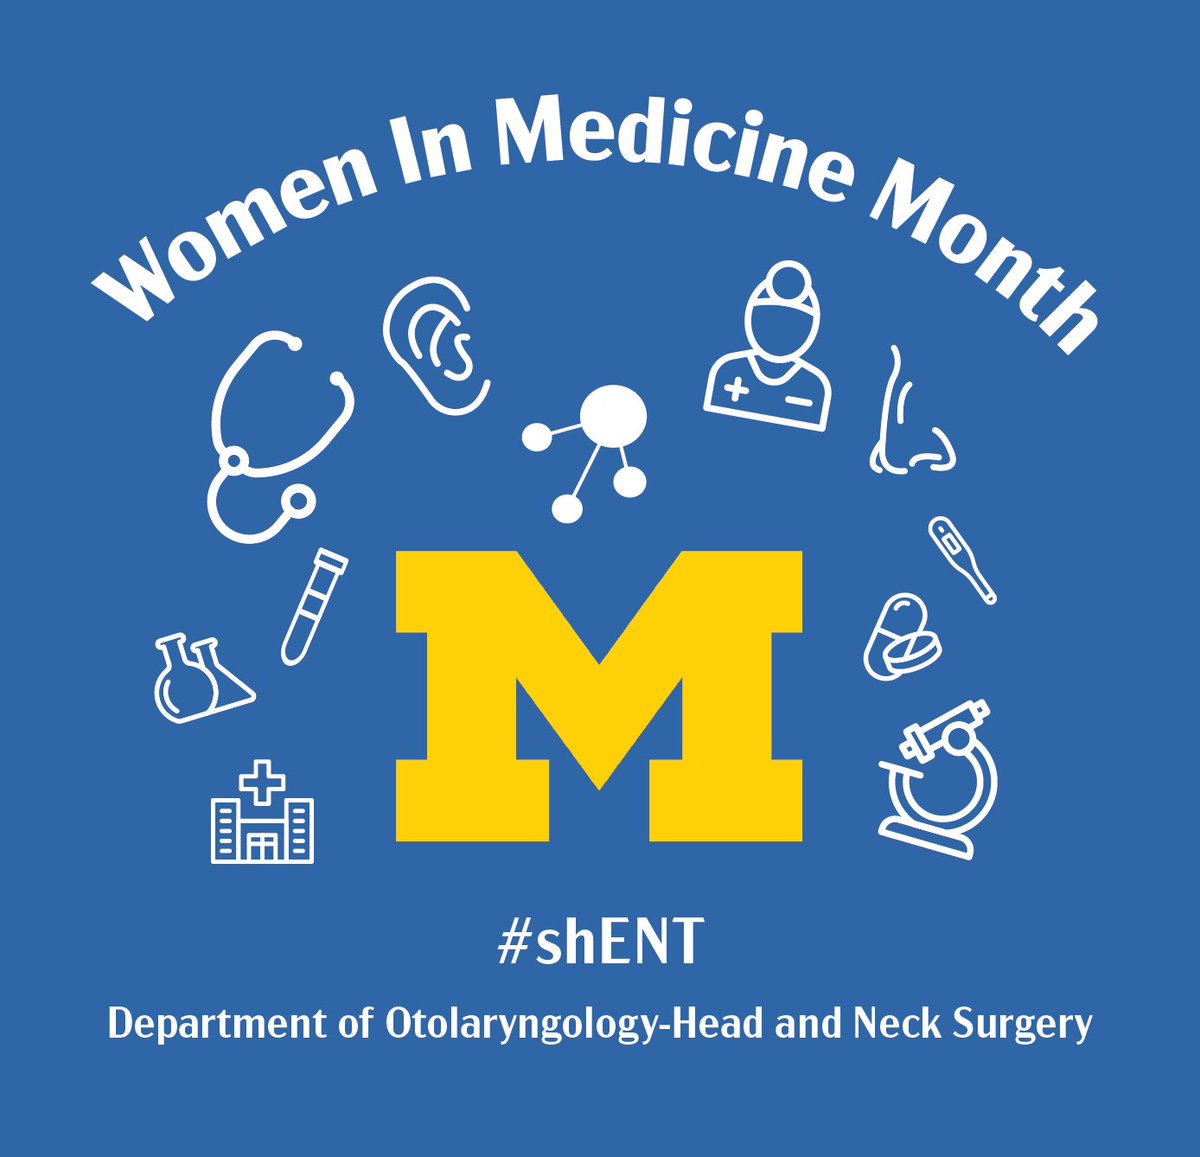 September is Women In Medicine Month which celebrates women physicians, fellows, residents & med students. We are grateful for all the women who heal, teach & inspire us each & every day. #WIMMonth #shENT